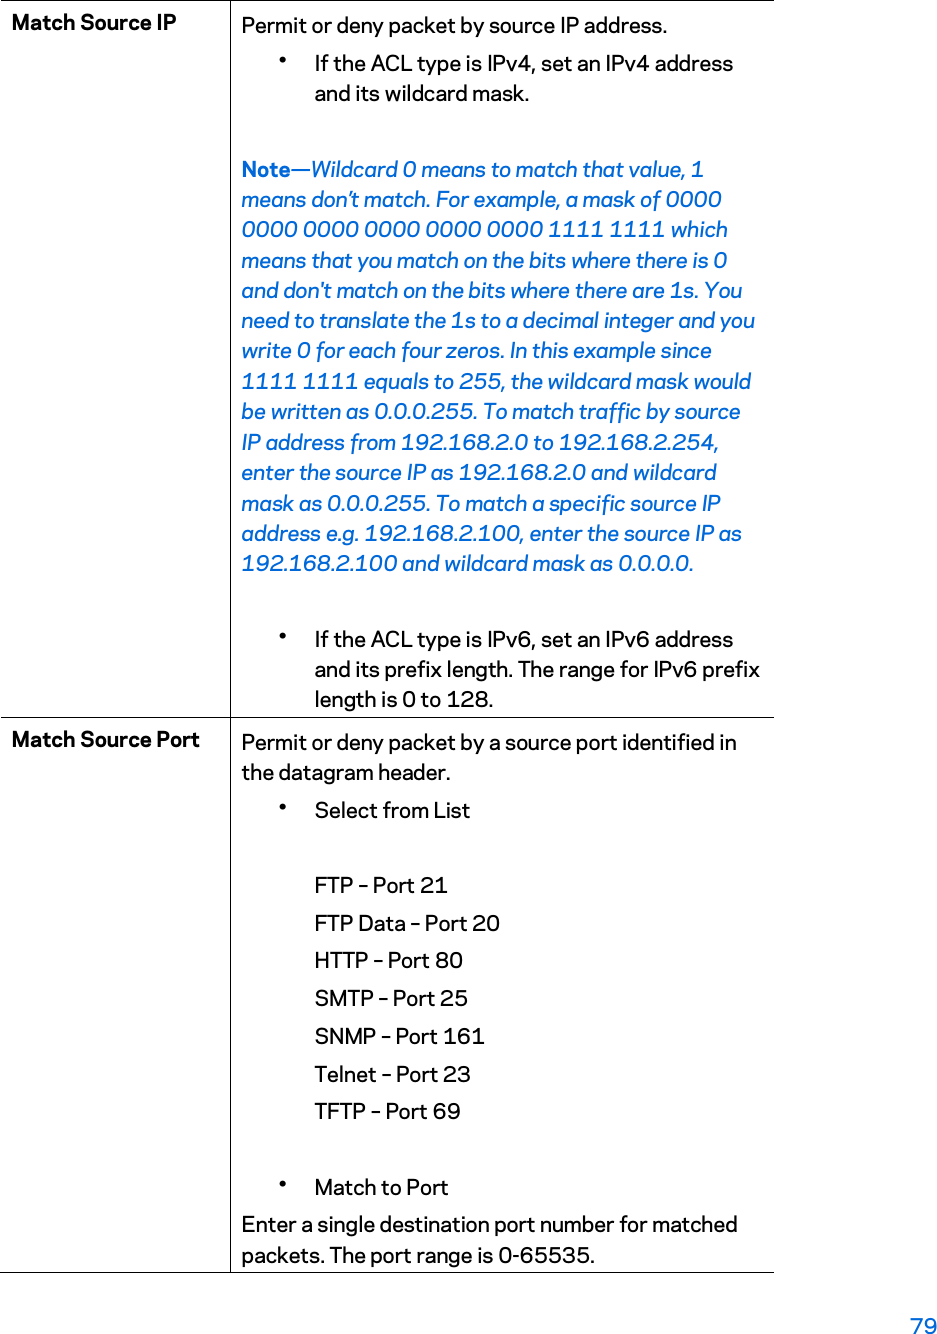 Match Source IP  Permit or deny packet by source IP address. yIf the ACL type is IPv4, set an IPv4 address and its wildcard mask.  Note—Wildcard 0 means to match that value, 1 means don’t match. For example, a mask of 0000 0000 0000 0000 0000 0000 1111 1111 which means that you match on the bits where there is 0 and don&apos;t match on the bits where there are 1s. You need to translate the 1s to a decimal integer and you write 0 for each four zeros. In this example since 1111 1111 equals to 255, the wildcard mask would be written as 0.0.0.255. To match traffic by source IP address from 192.168.2.0 to 192.168.2.254, enter the source IP as 192.168.2.0 and wildcard mask as 0.0.0.255. To match a specific source IP address e.g. 192.168.2.100, enter the source IP as 192.168.2.100 and wildcard mask as 0.0.0.0.   yIf the ACL type is IPv6, set an IPv6 address and its prefix length. The range for IPv6 prefix length is 0 to 128.  Match Source Port  Permit or deny packet by a source port identified in the datagram header. ySelect from List      FTP – Port 21 FTP Data – Port 20 HTTP – Port 80 SMTP – Port 25 SNMP – Port 161 Telnet – Port 23 TFTP – Port 69 yMatch to Port Enter a single destination port number for matched packets. The port range is 0-65535.  79 